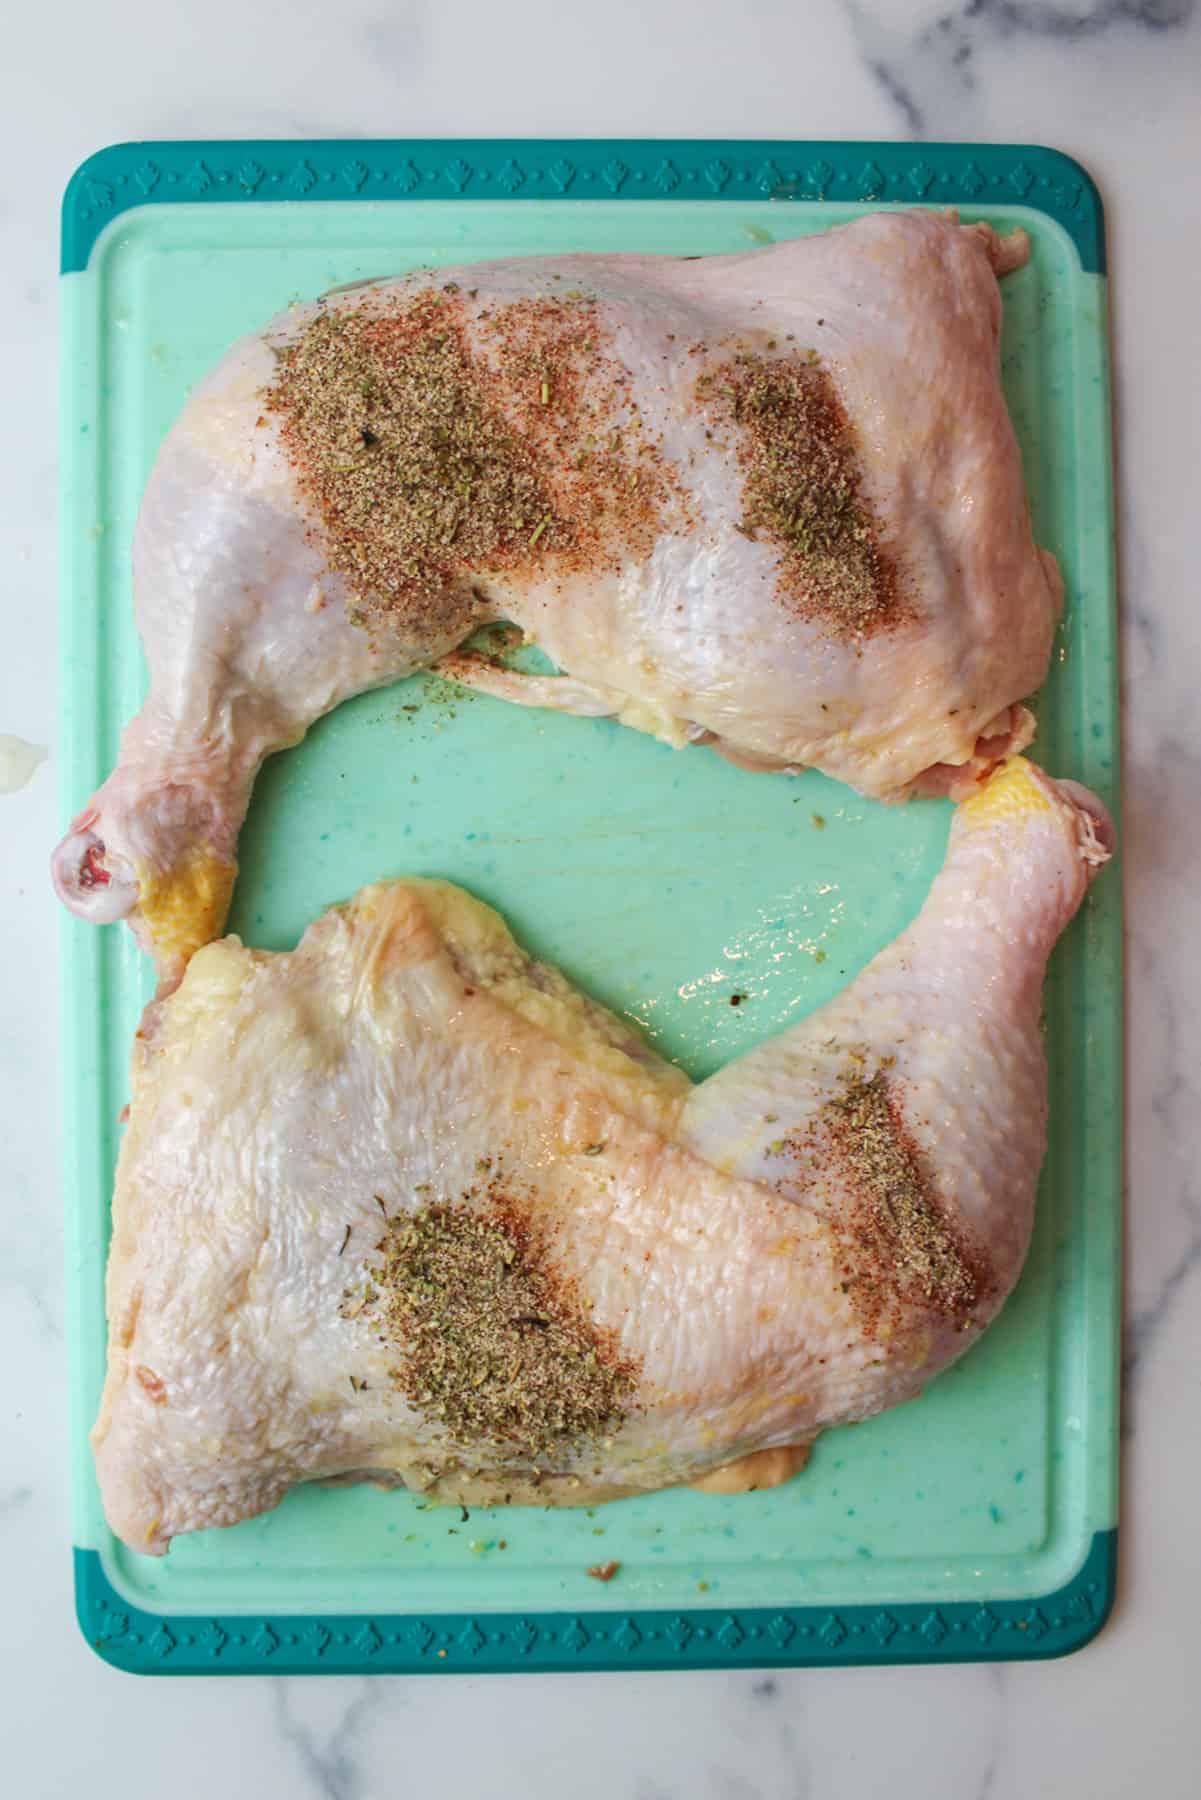 sprinkled seasoning over chicken quarters on cutting board.